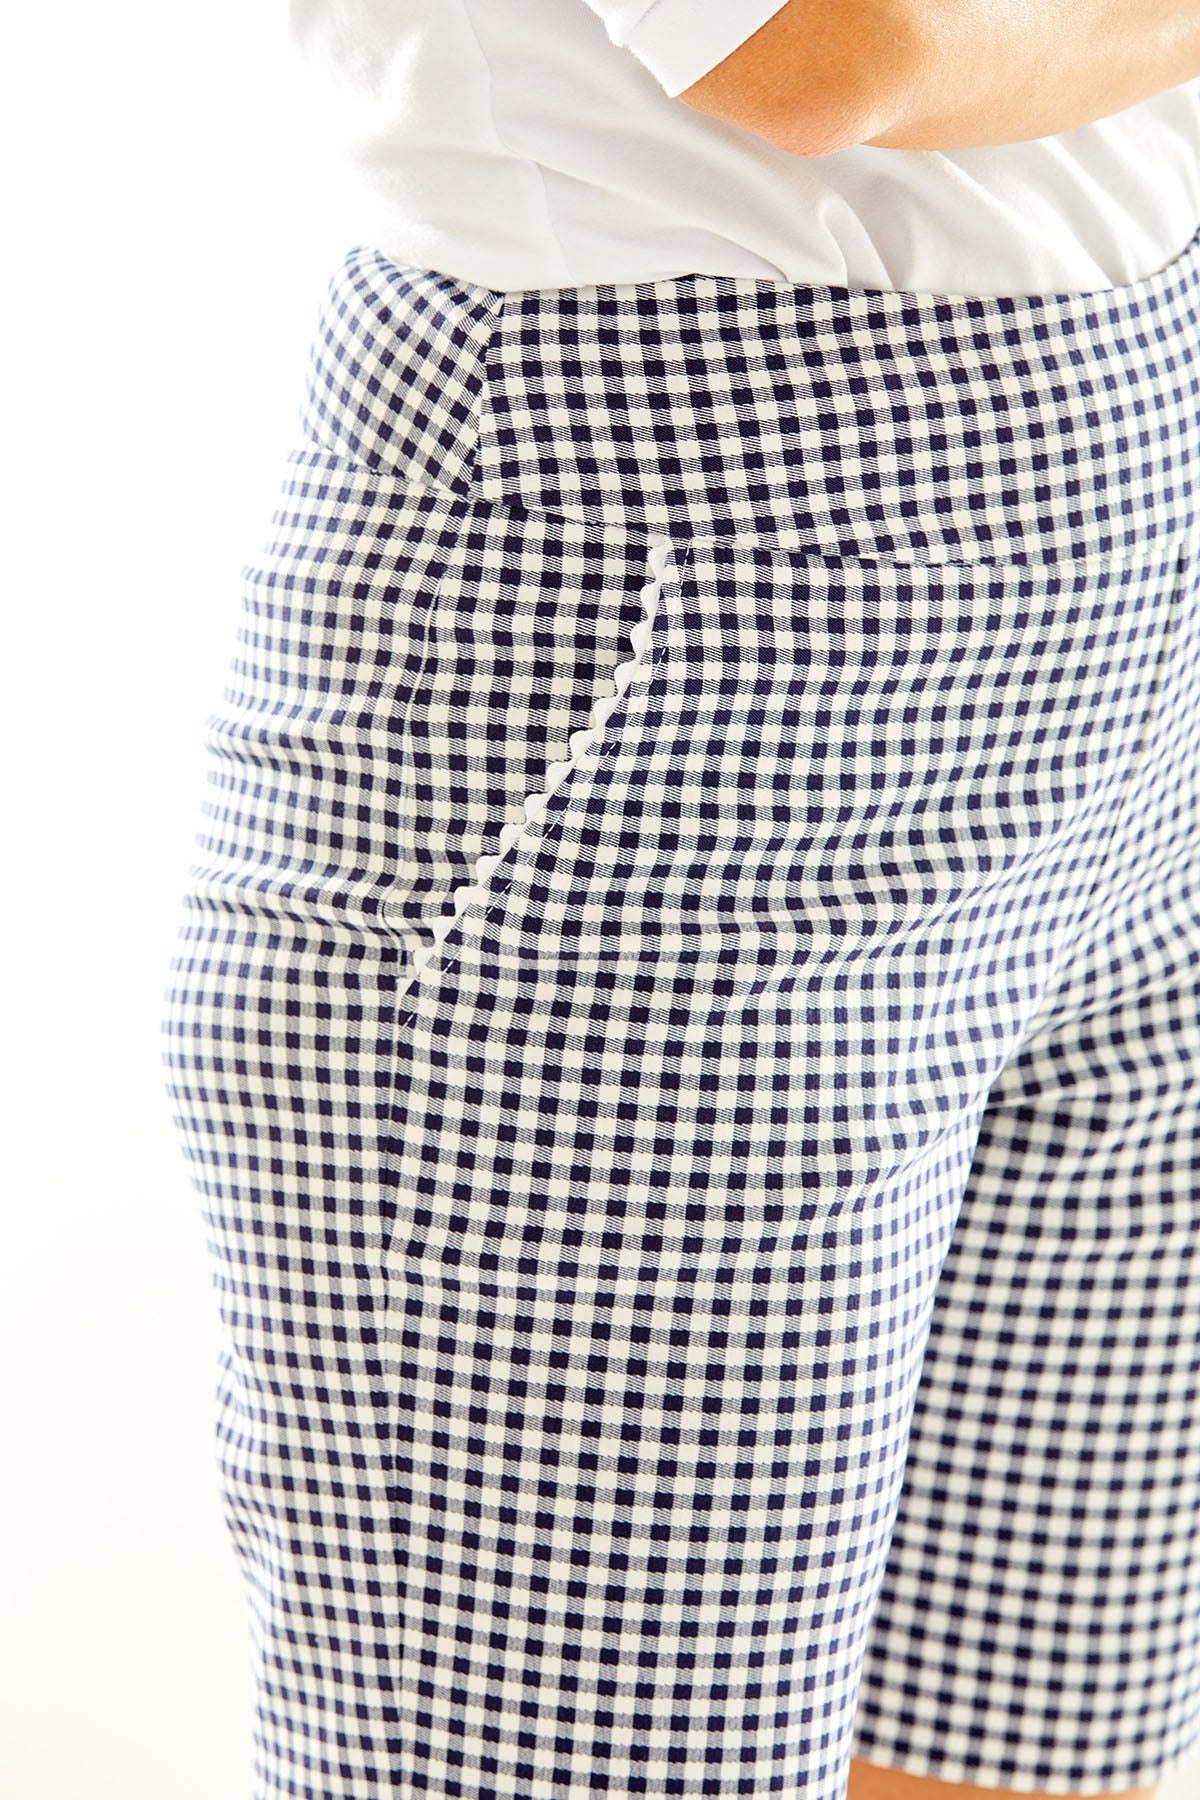 Woman in gingham golf shorts